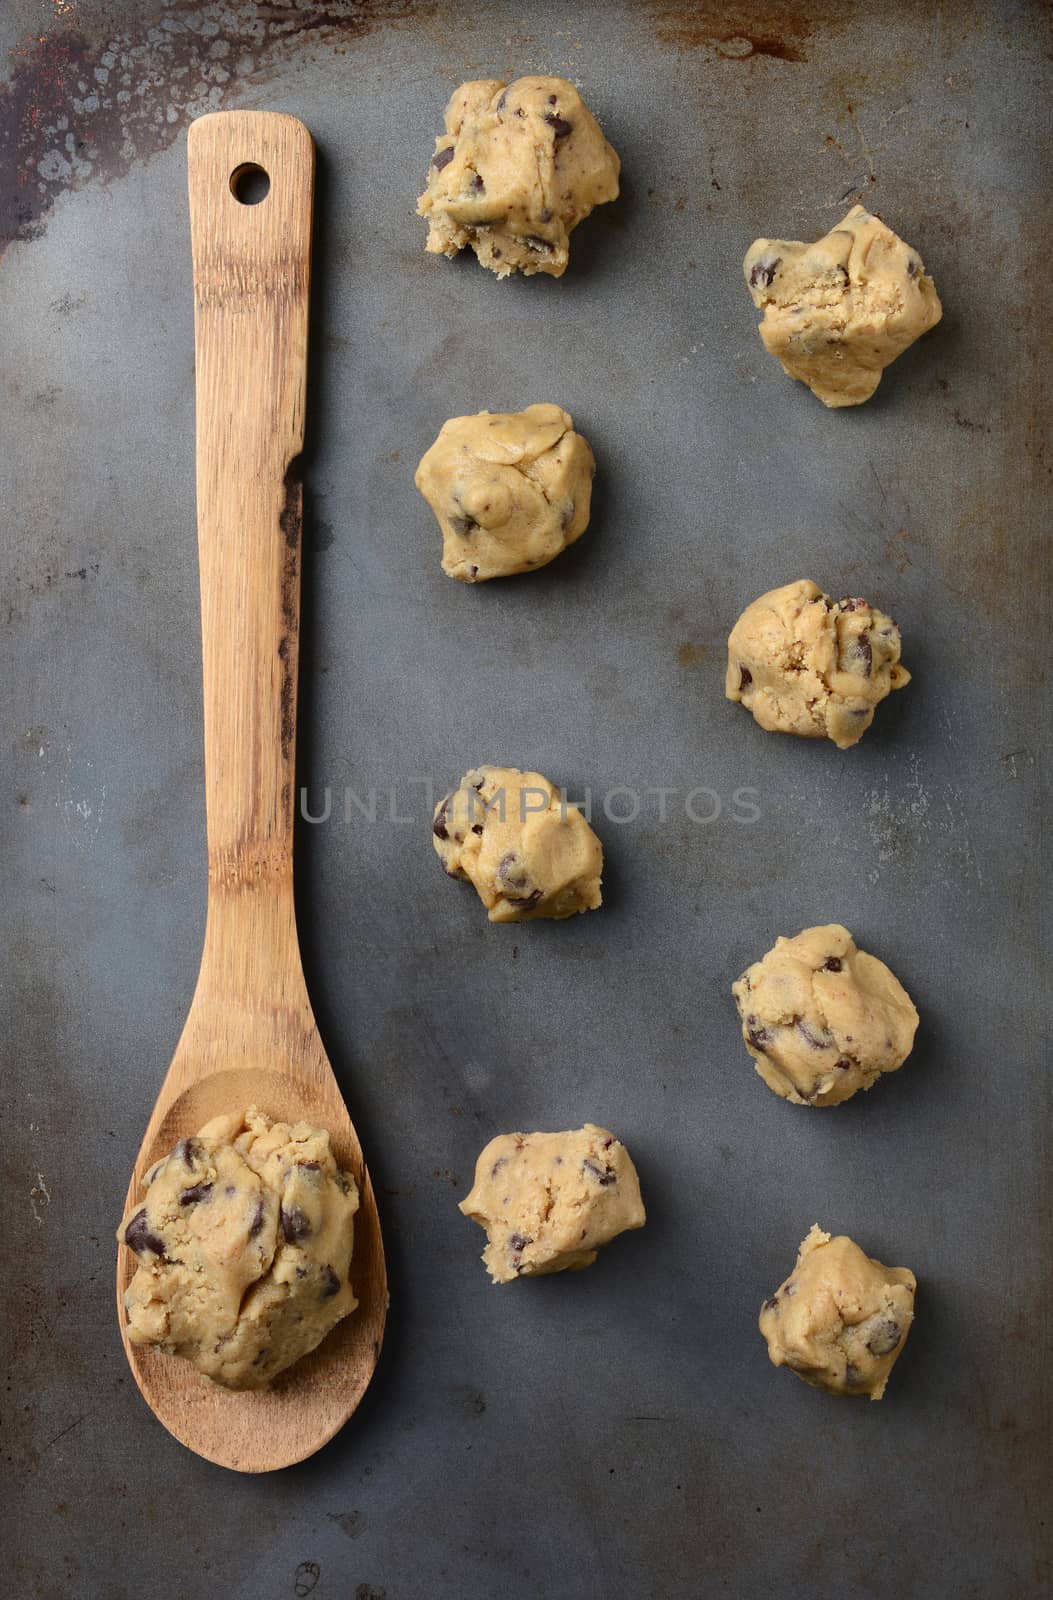 Overhead shot of chocolate chip cookie dough on a cookie sheet, with a wooden spoon holding a big gob of the raw dough. Vertical Format.